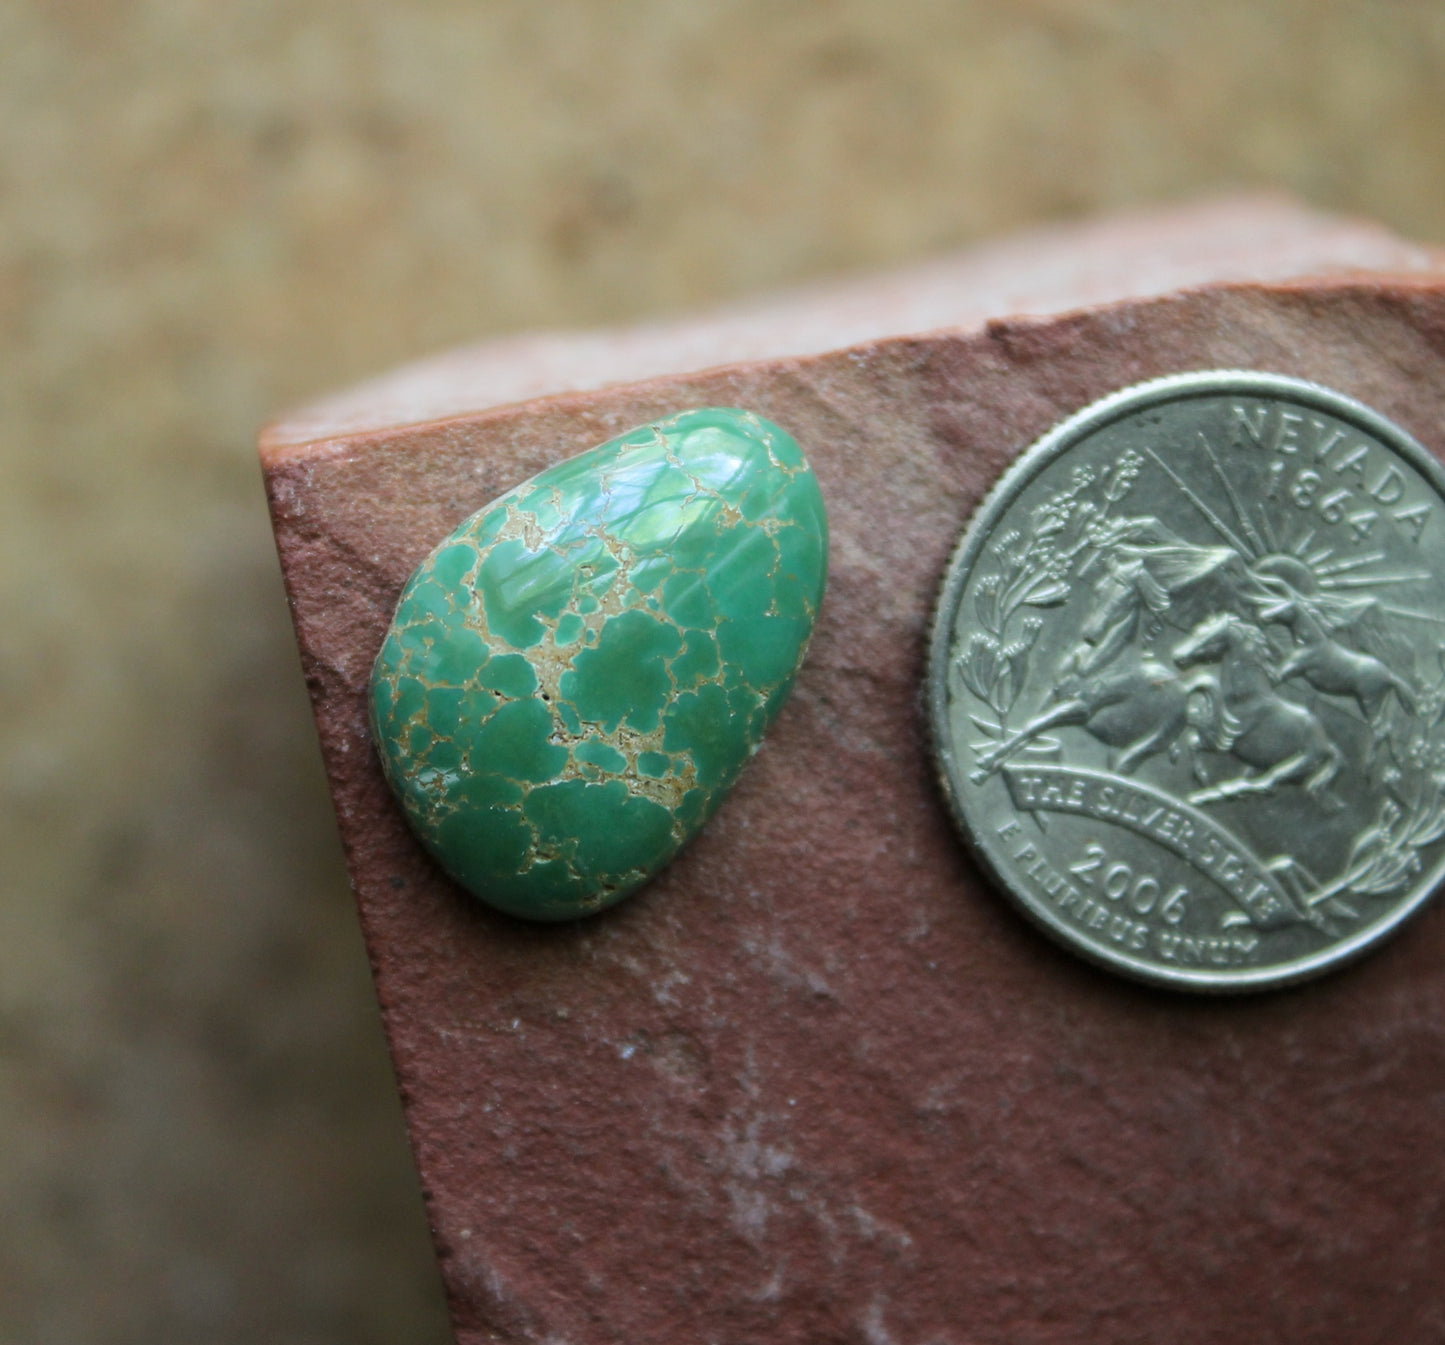 12 carat green turquoise spiderweb cabochon from the Cresent Valley in Nevada